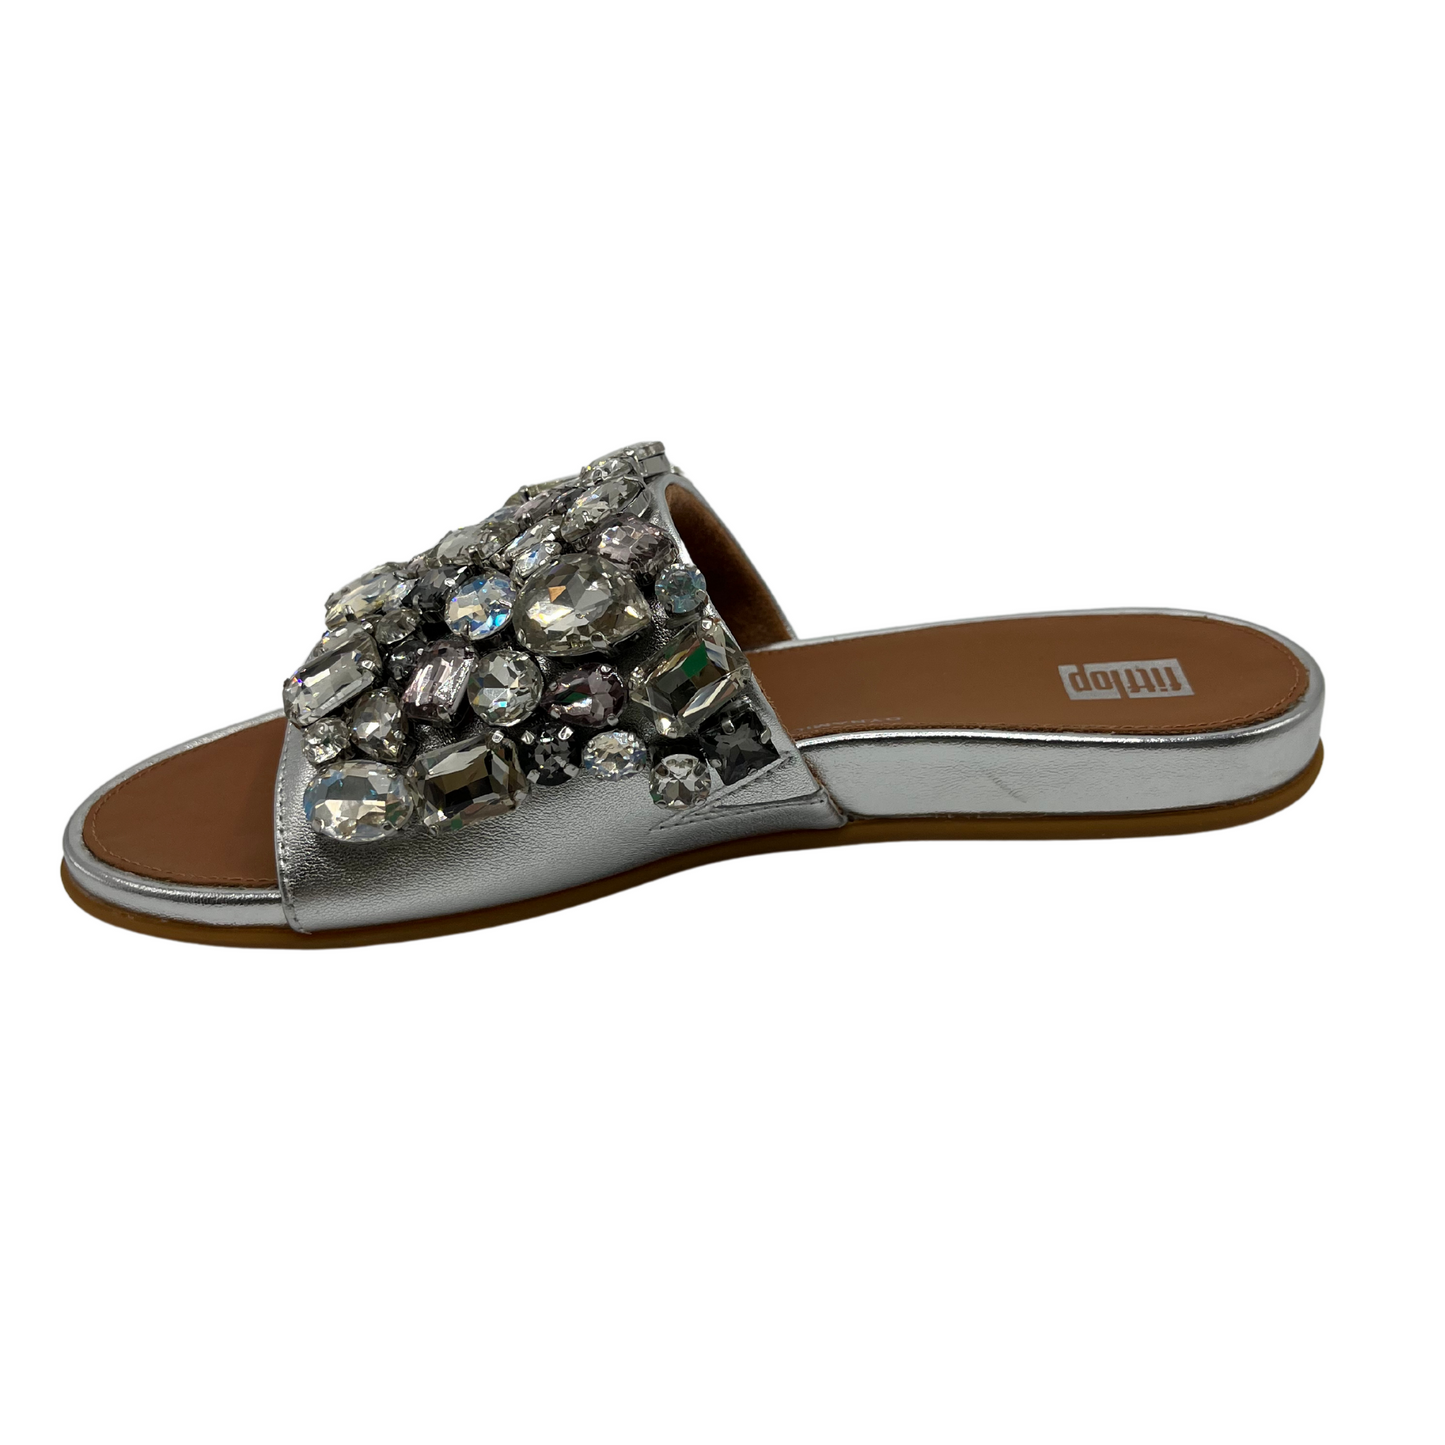 Left facing view of silver slip on sandal with jewel embellishments and open toe